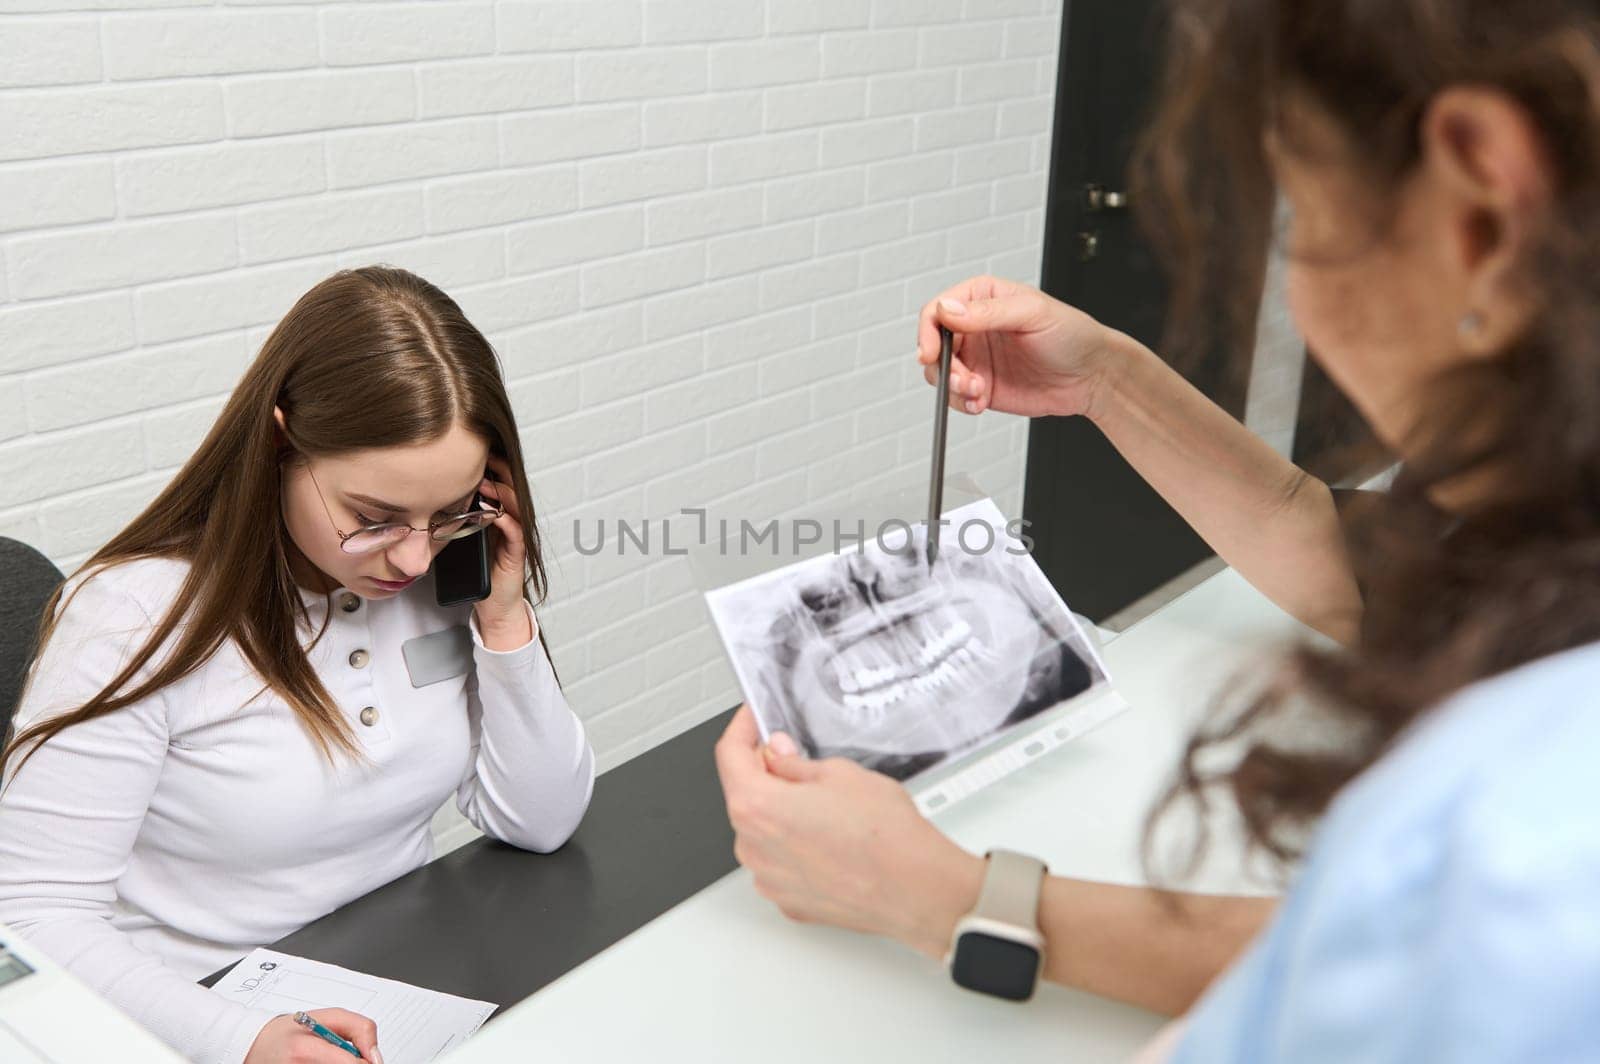 Female receptionist talks on mobile phone. Blurred foreground of a dentist holding dental x-ray panoramic radiography by artgf